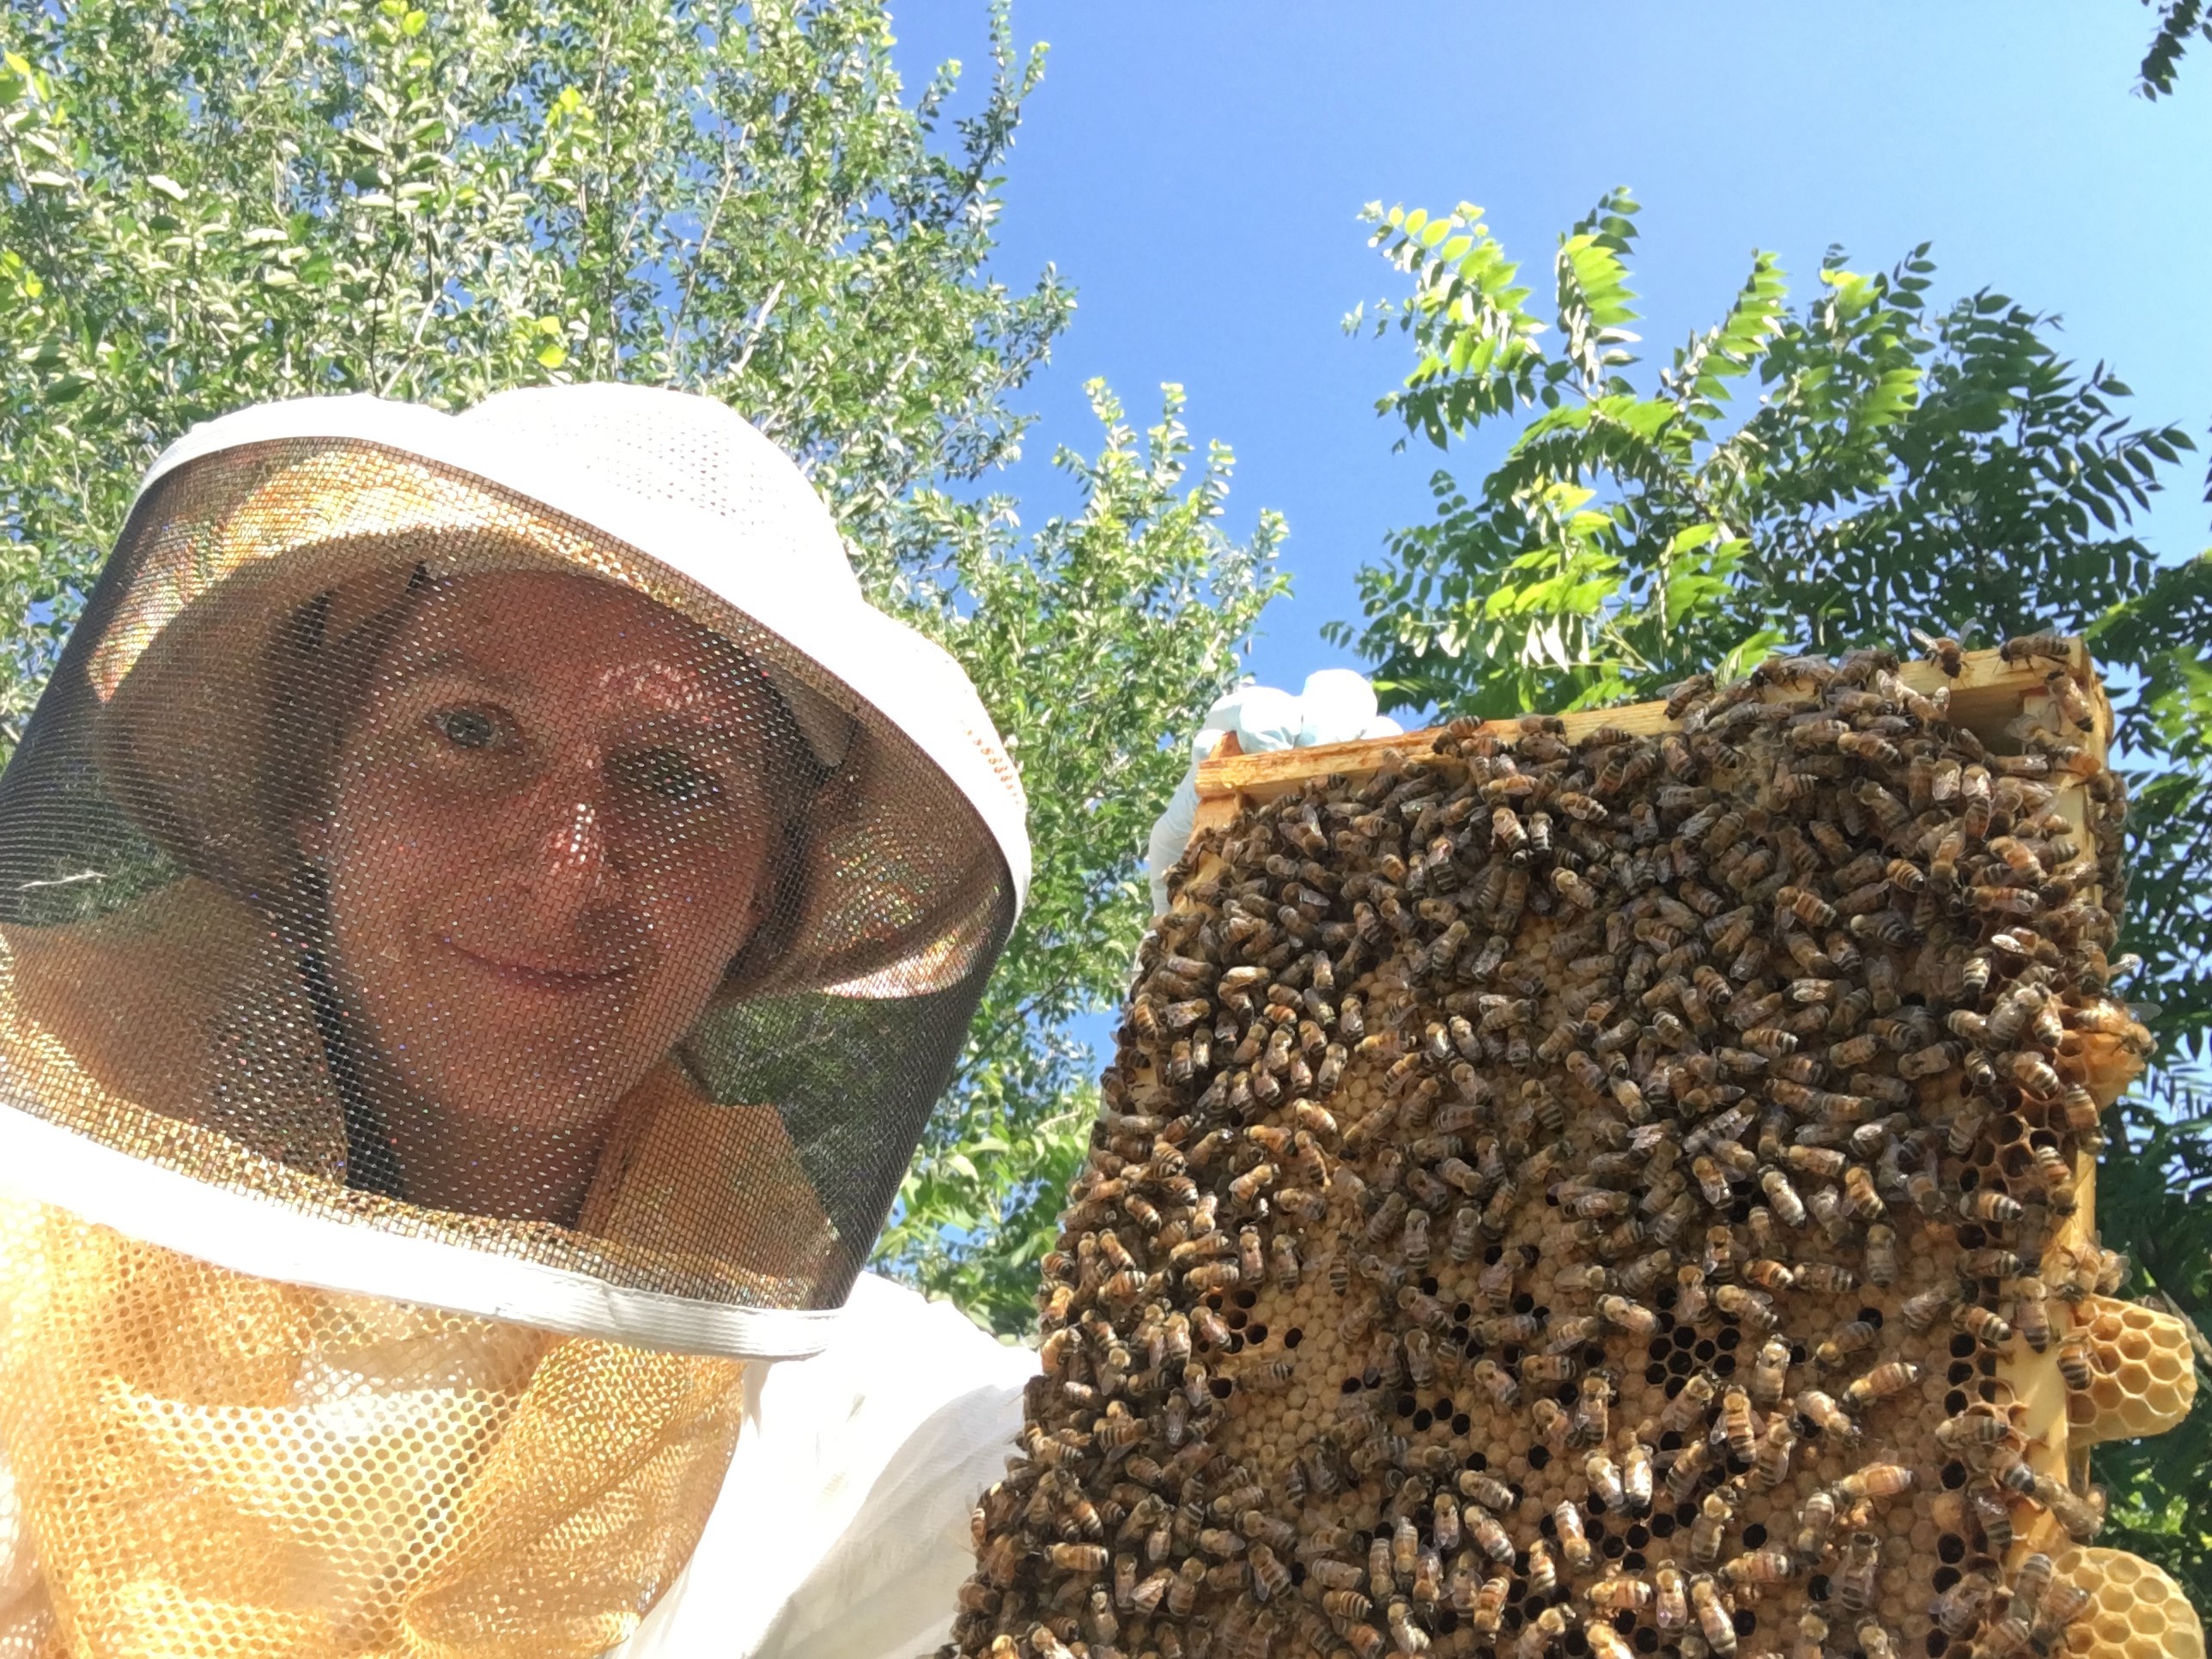 Eva Reinicke with some of her bees 